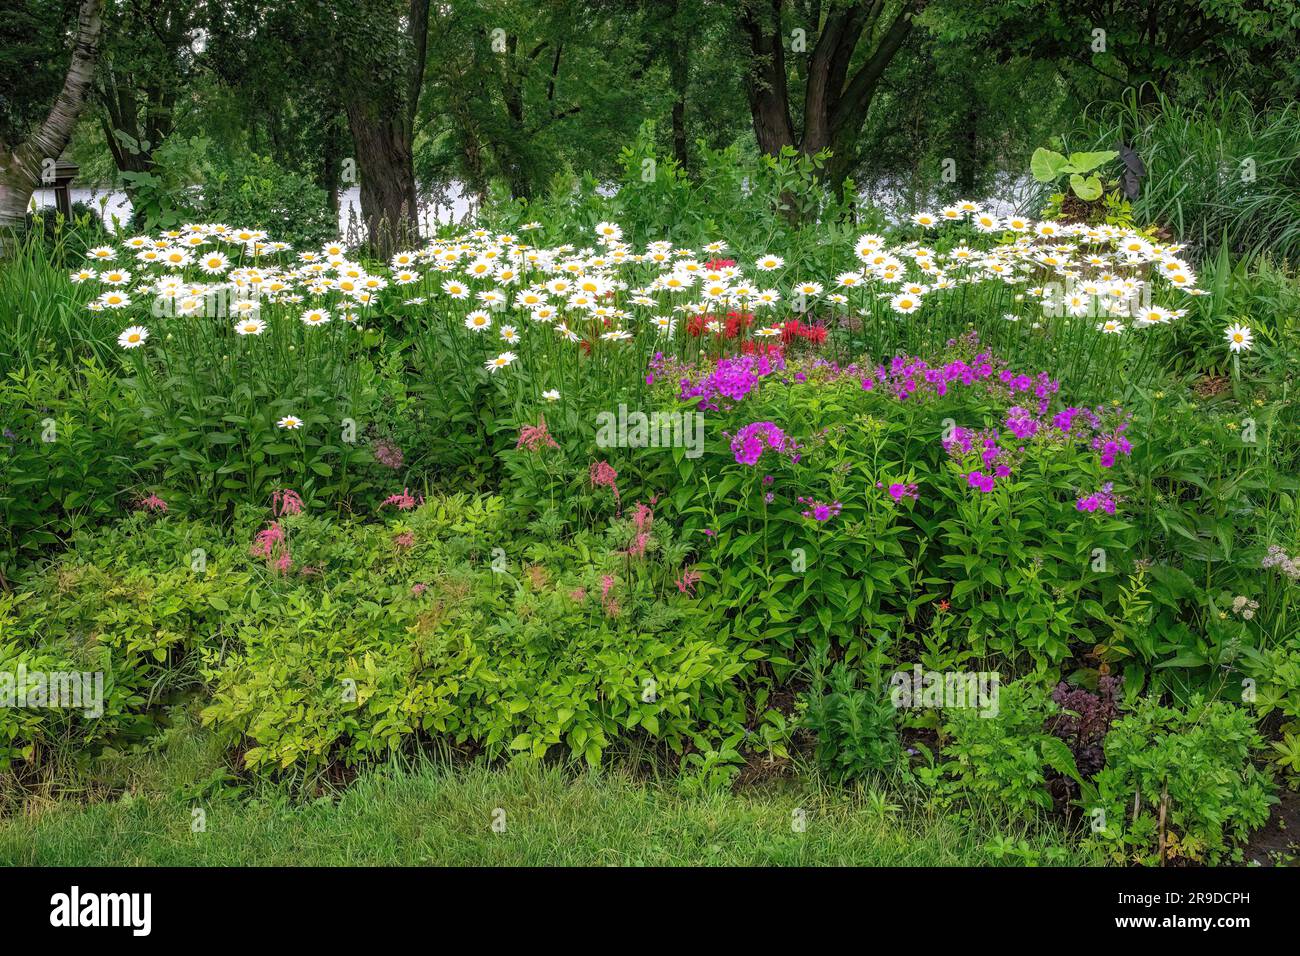 Flower garden with pink astilbe, purple phlox, white daisies and red bee balm or monarda at Munsinger Gardens on the Mississippi River in St Cloud, MN Stock Photo